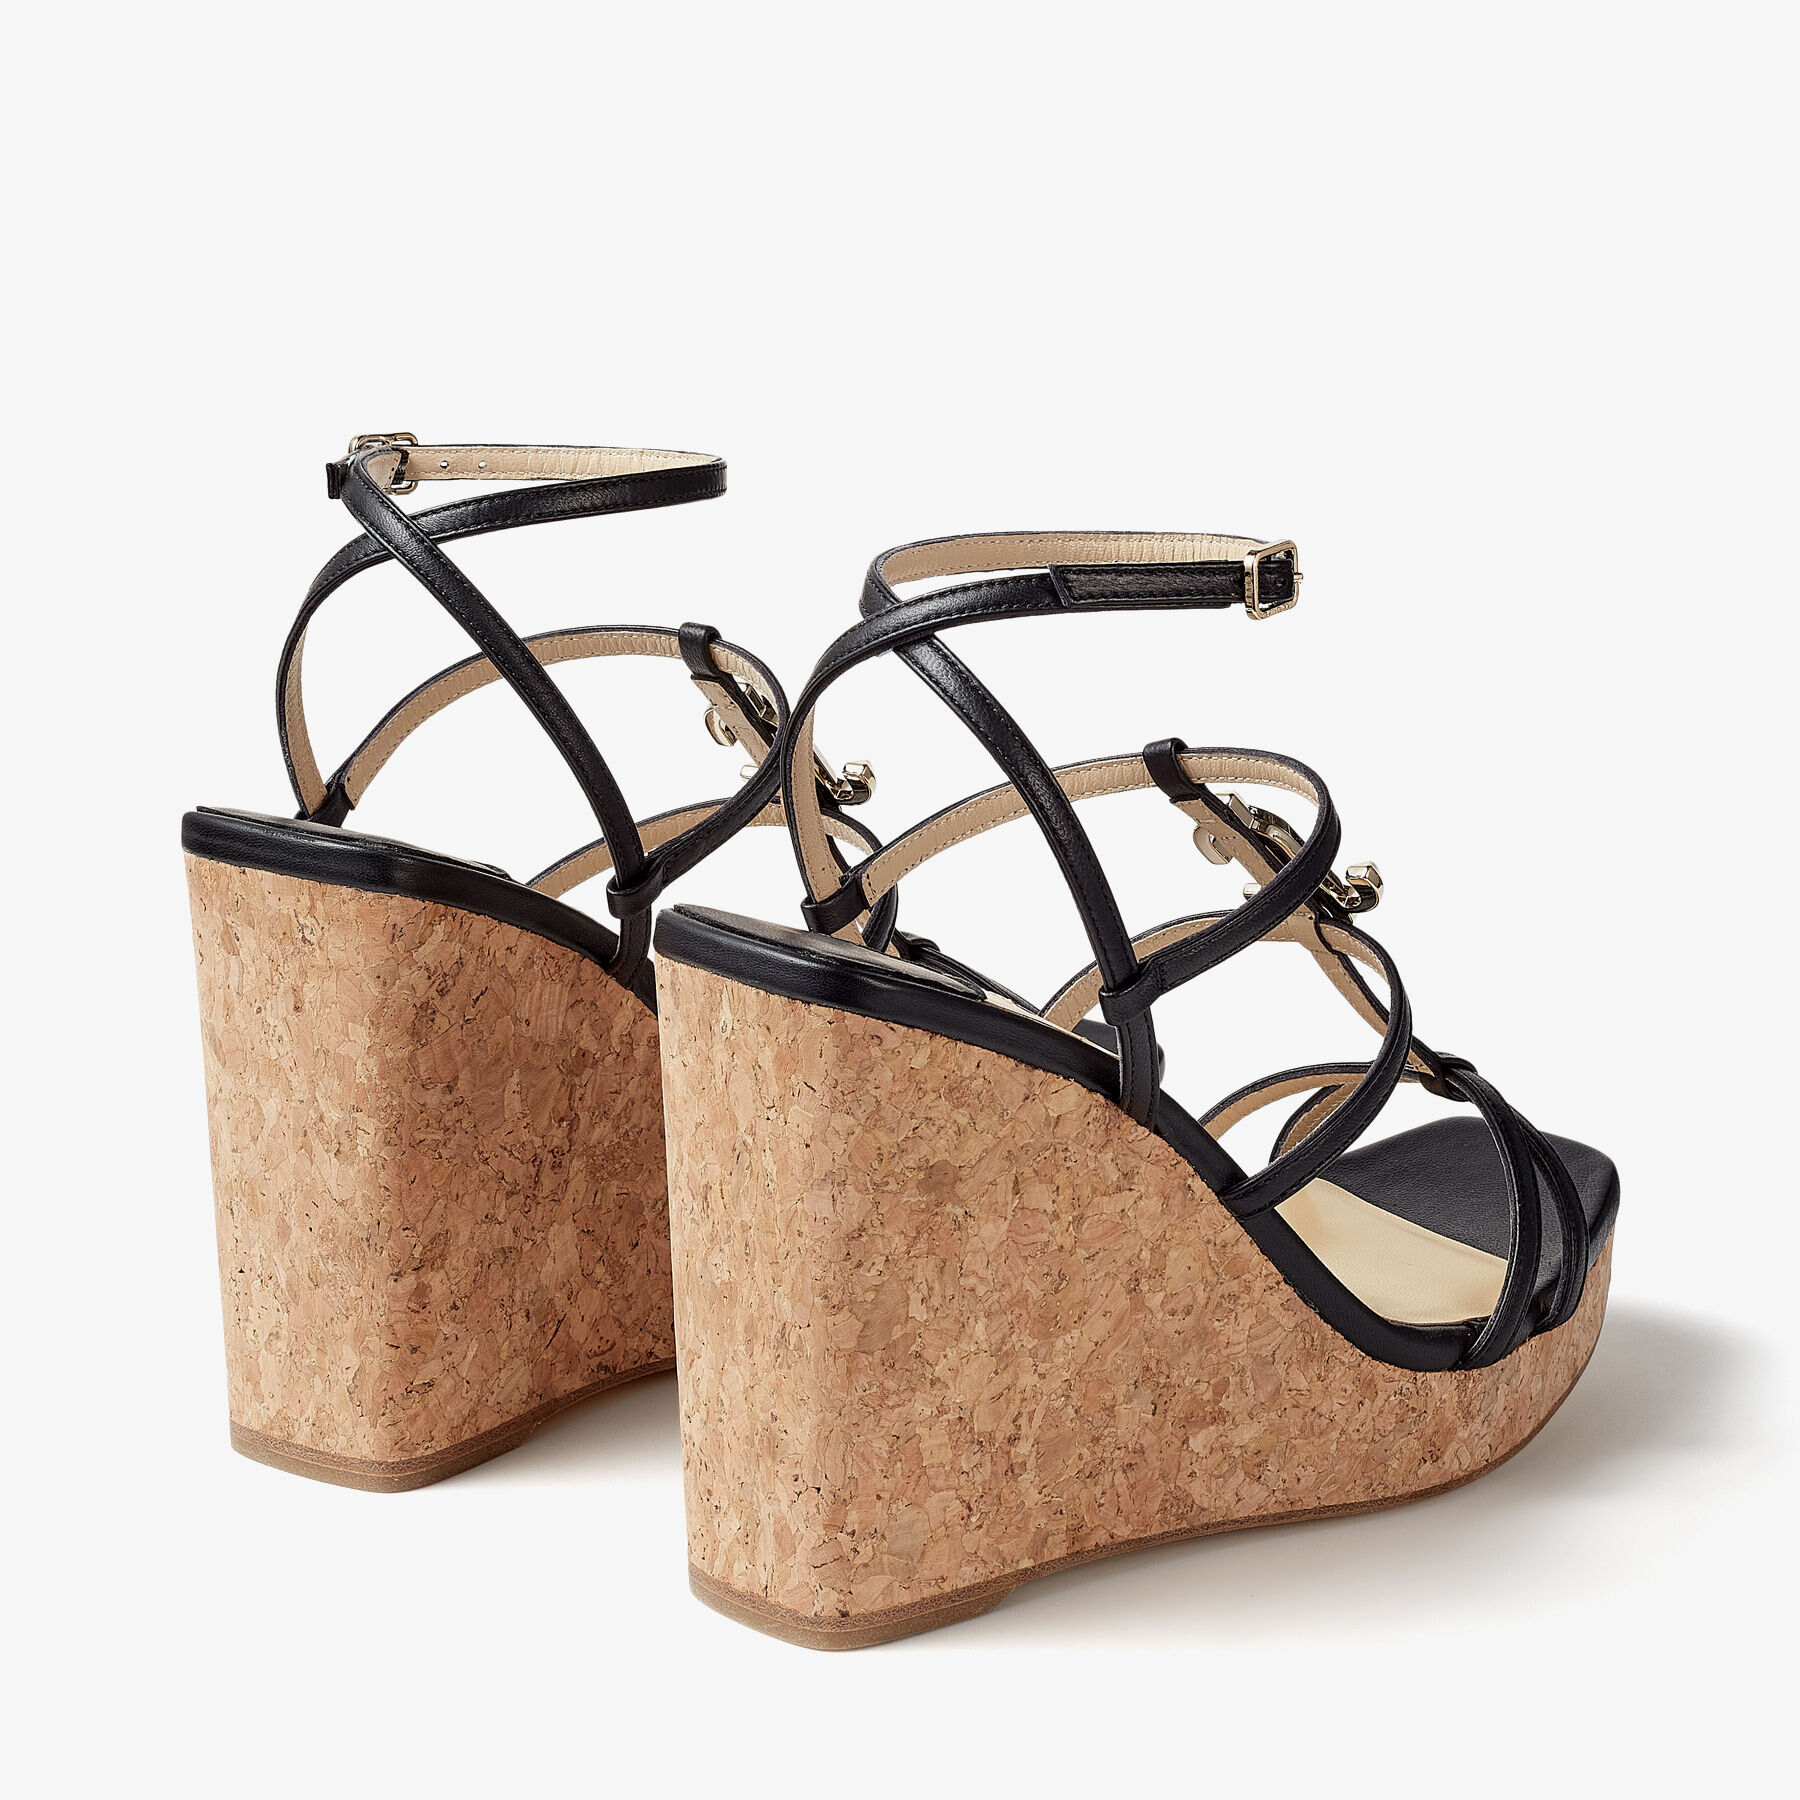 Black Nappa Leather Wedges with JC Emblem | JC WEDGE 110 | High Summer ...